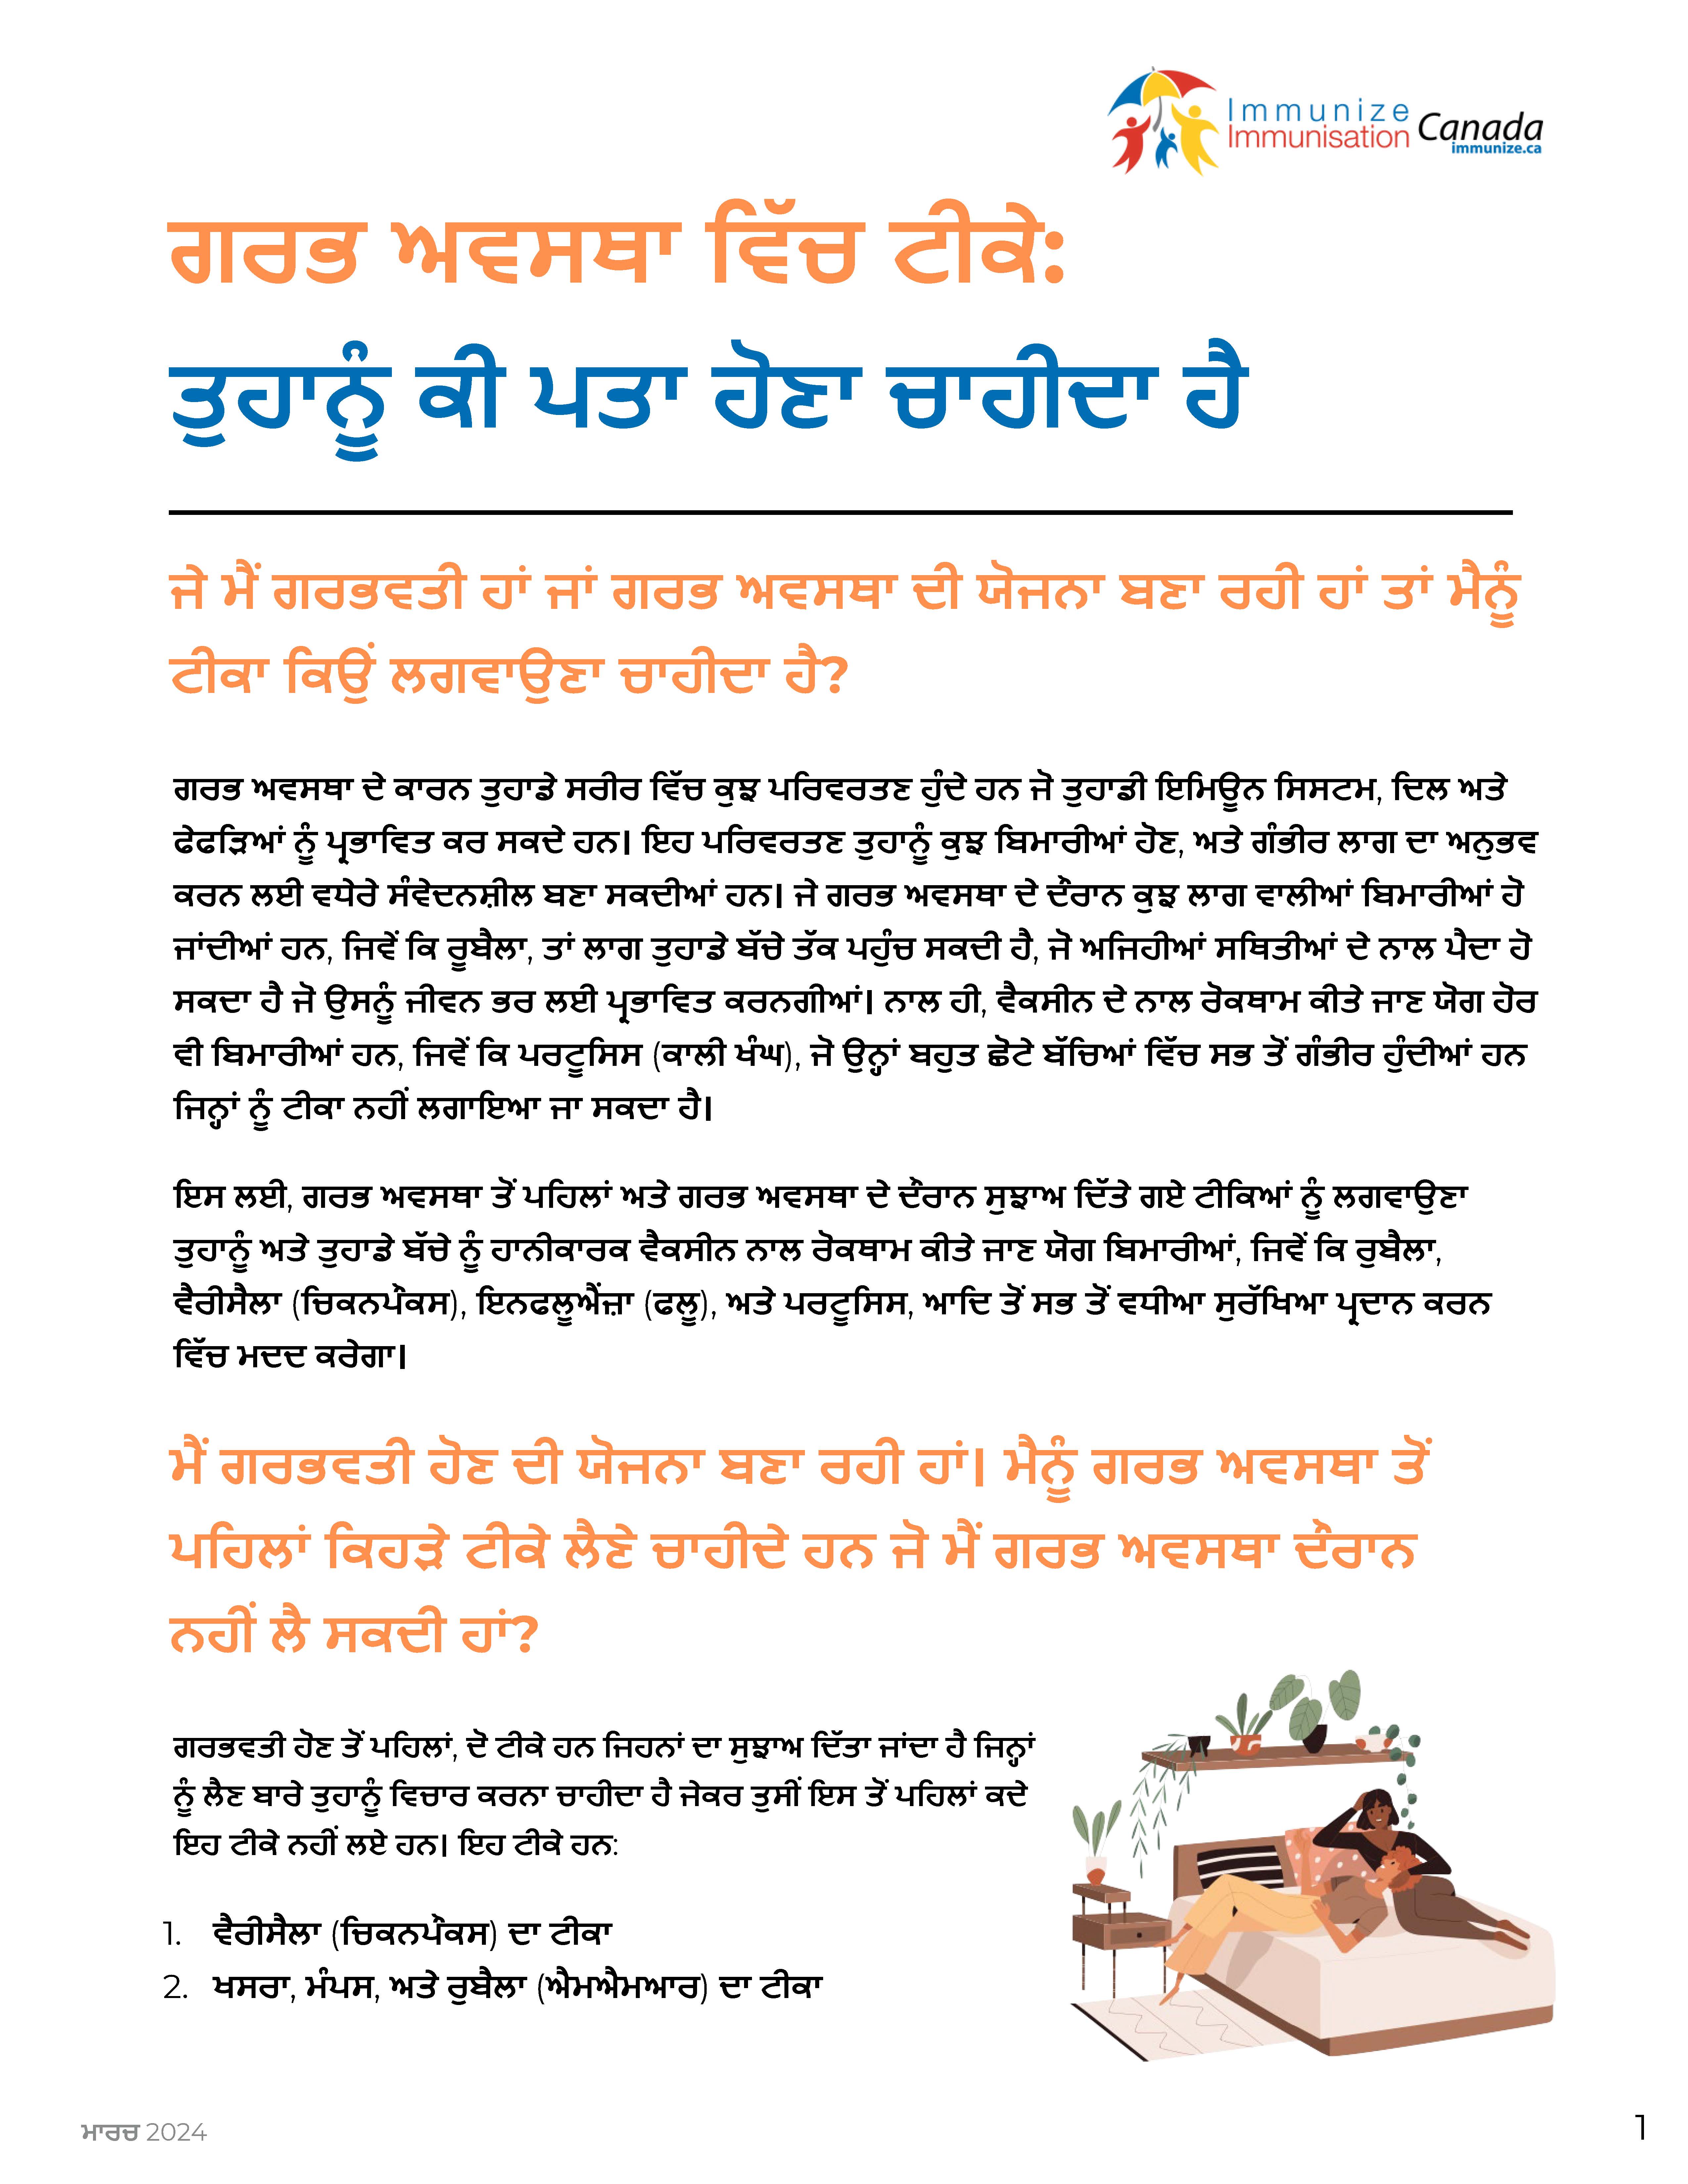 Vaccines in Pregnancy: What you need to know (factsheet in Punjabi)